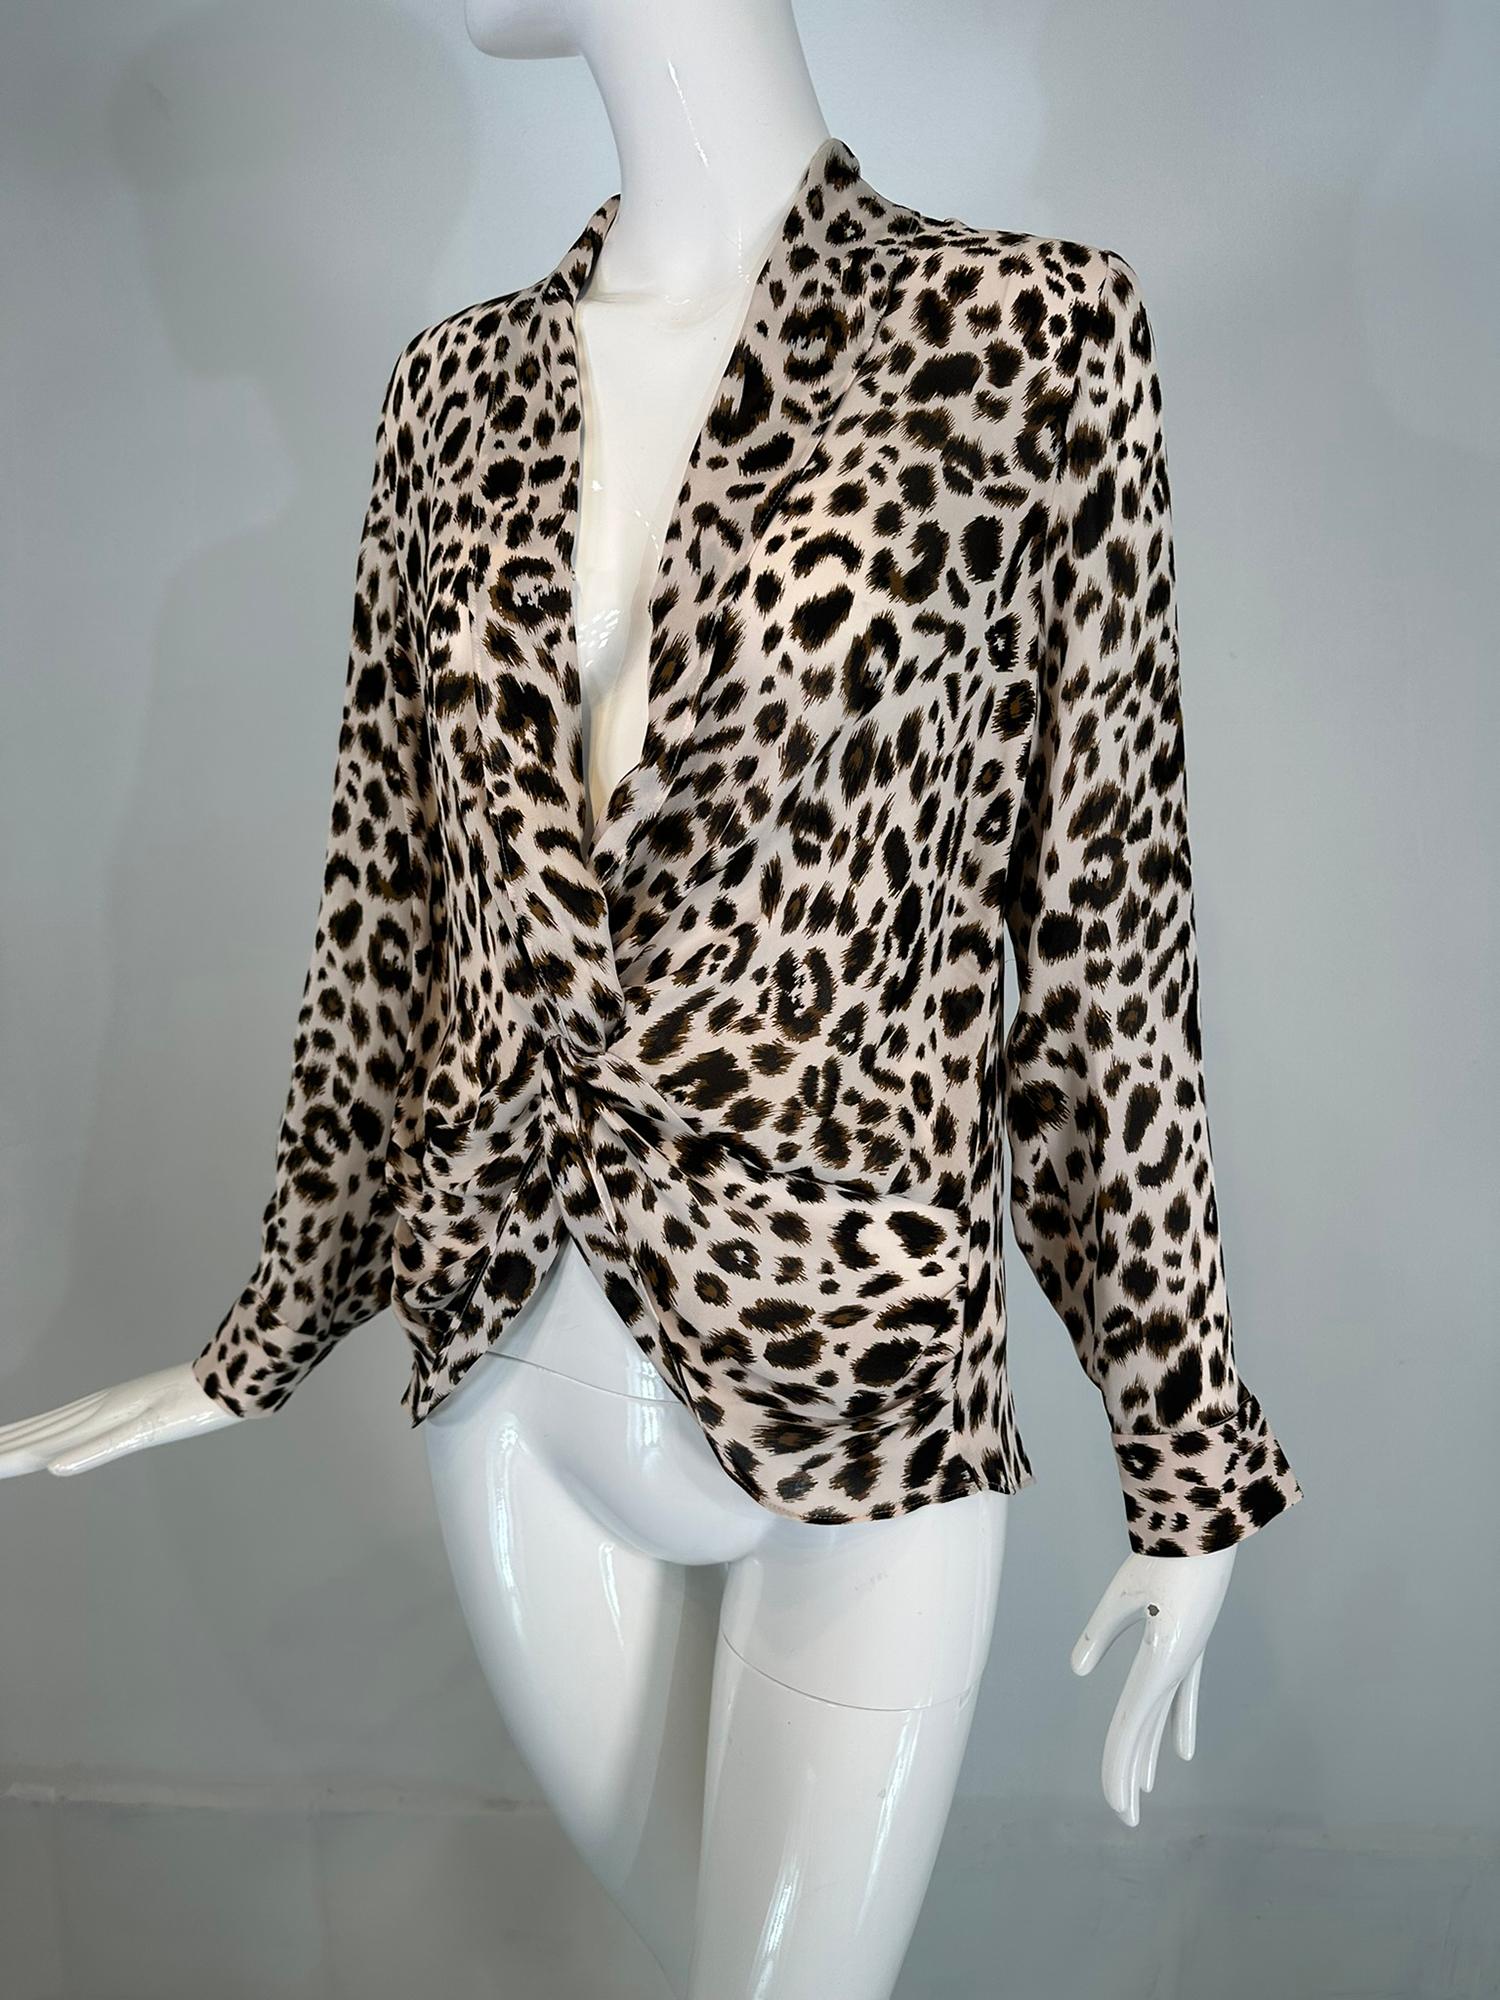 L’AGENCE leopard print silk plunge V neckline twisted wrap front effect blouse. Long sleeves with button cuffs, draped collar that extends with the twisted fabric front. The blouse pulls on. Looks barely, if ever, worn.
In excellent wearable